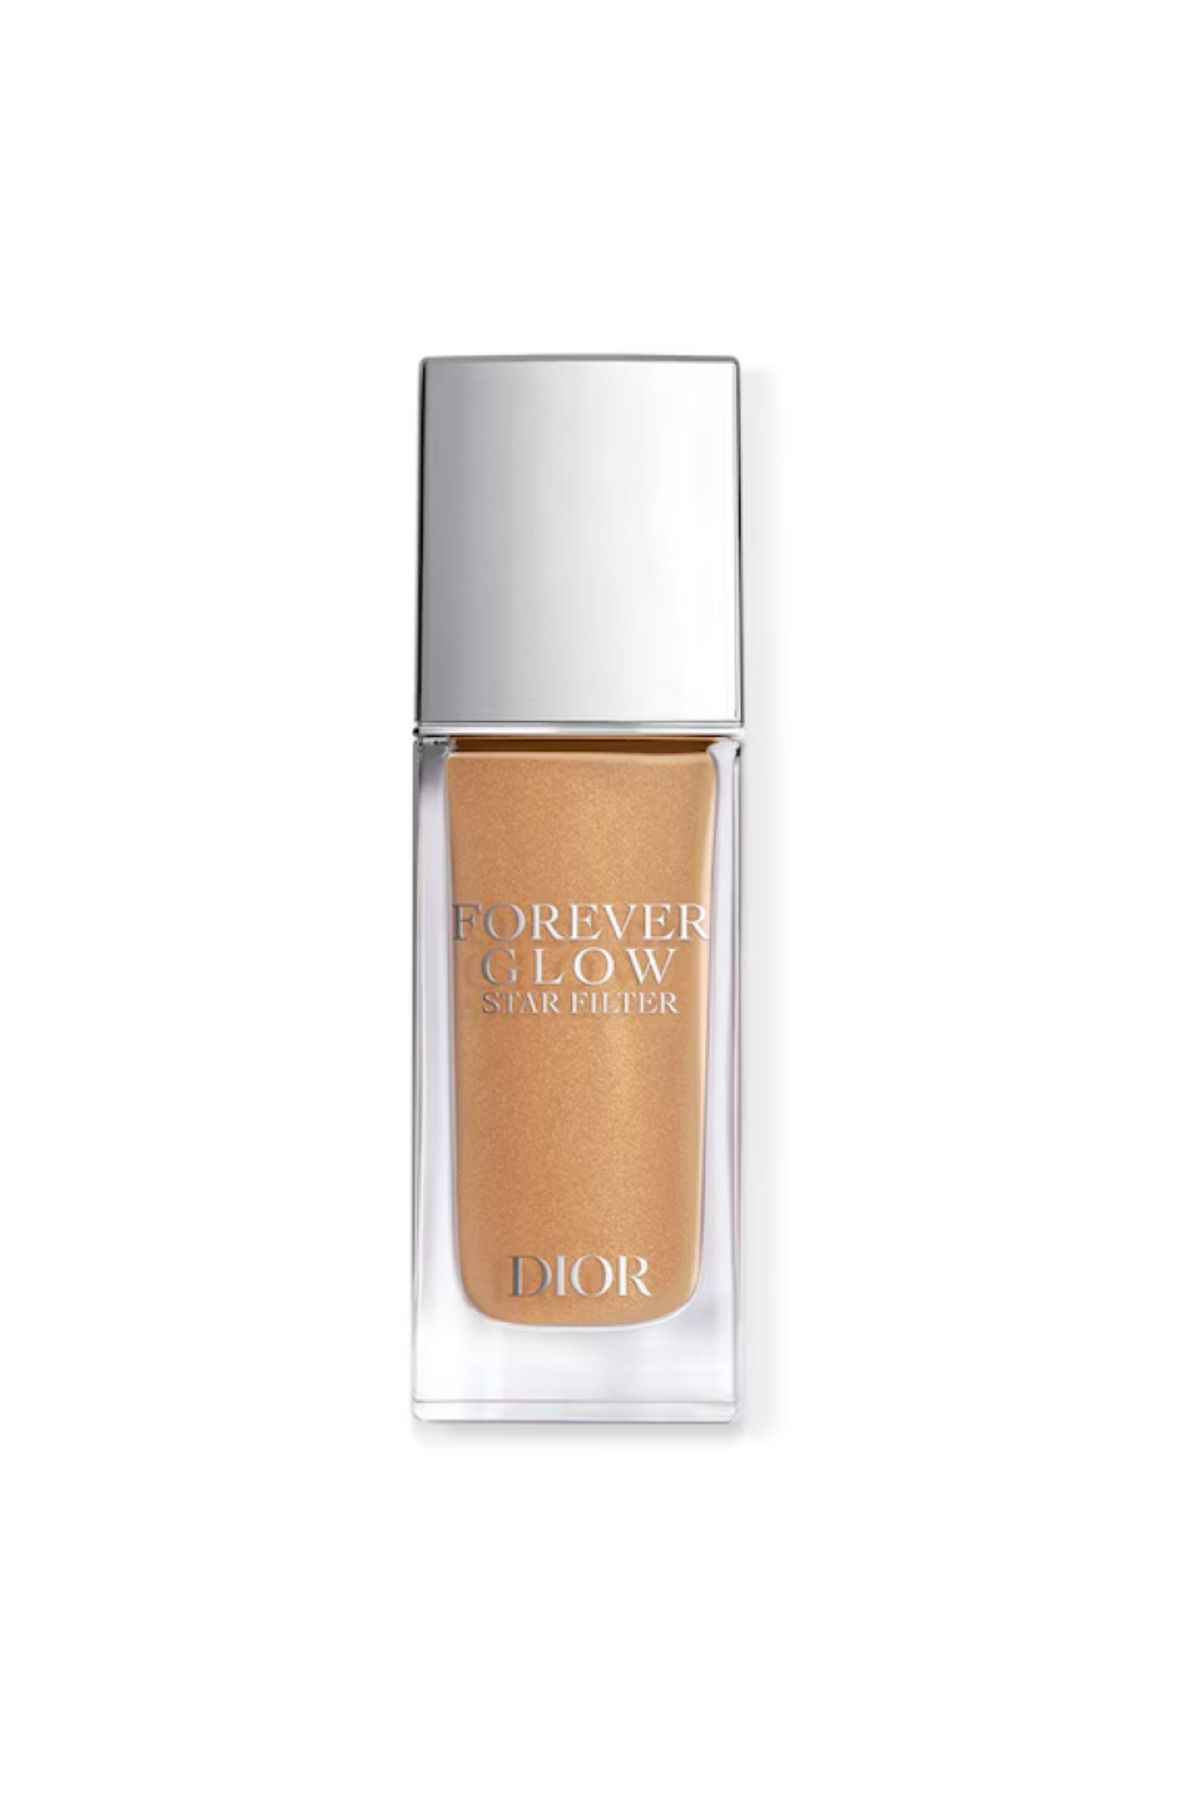 Dior FOREVER GLOW STAR FİLTER - COMPLEXİON SUBLİMATİNG FLUİD AND HİGHLİGHTER 30 ML PSSN2068